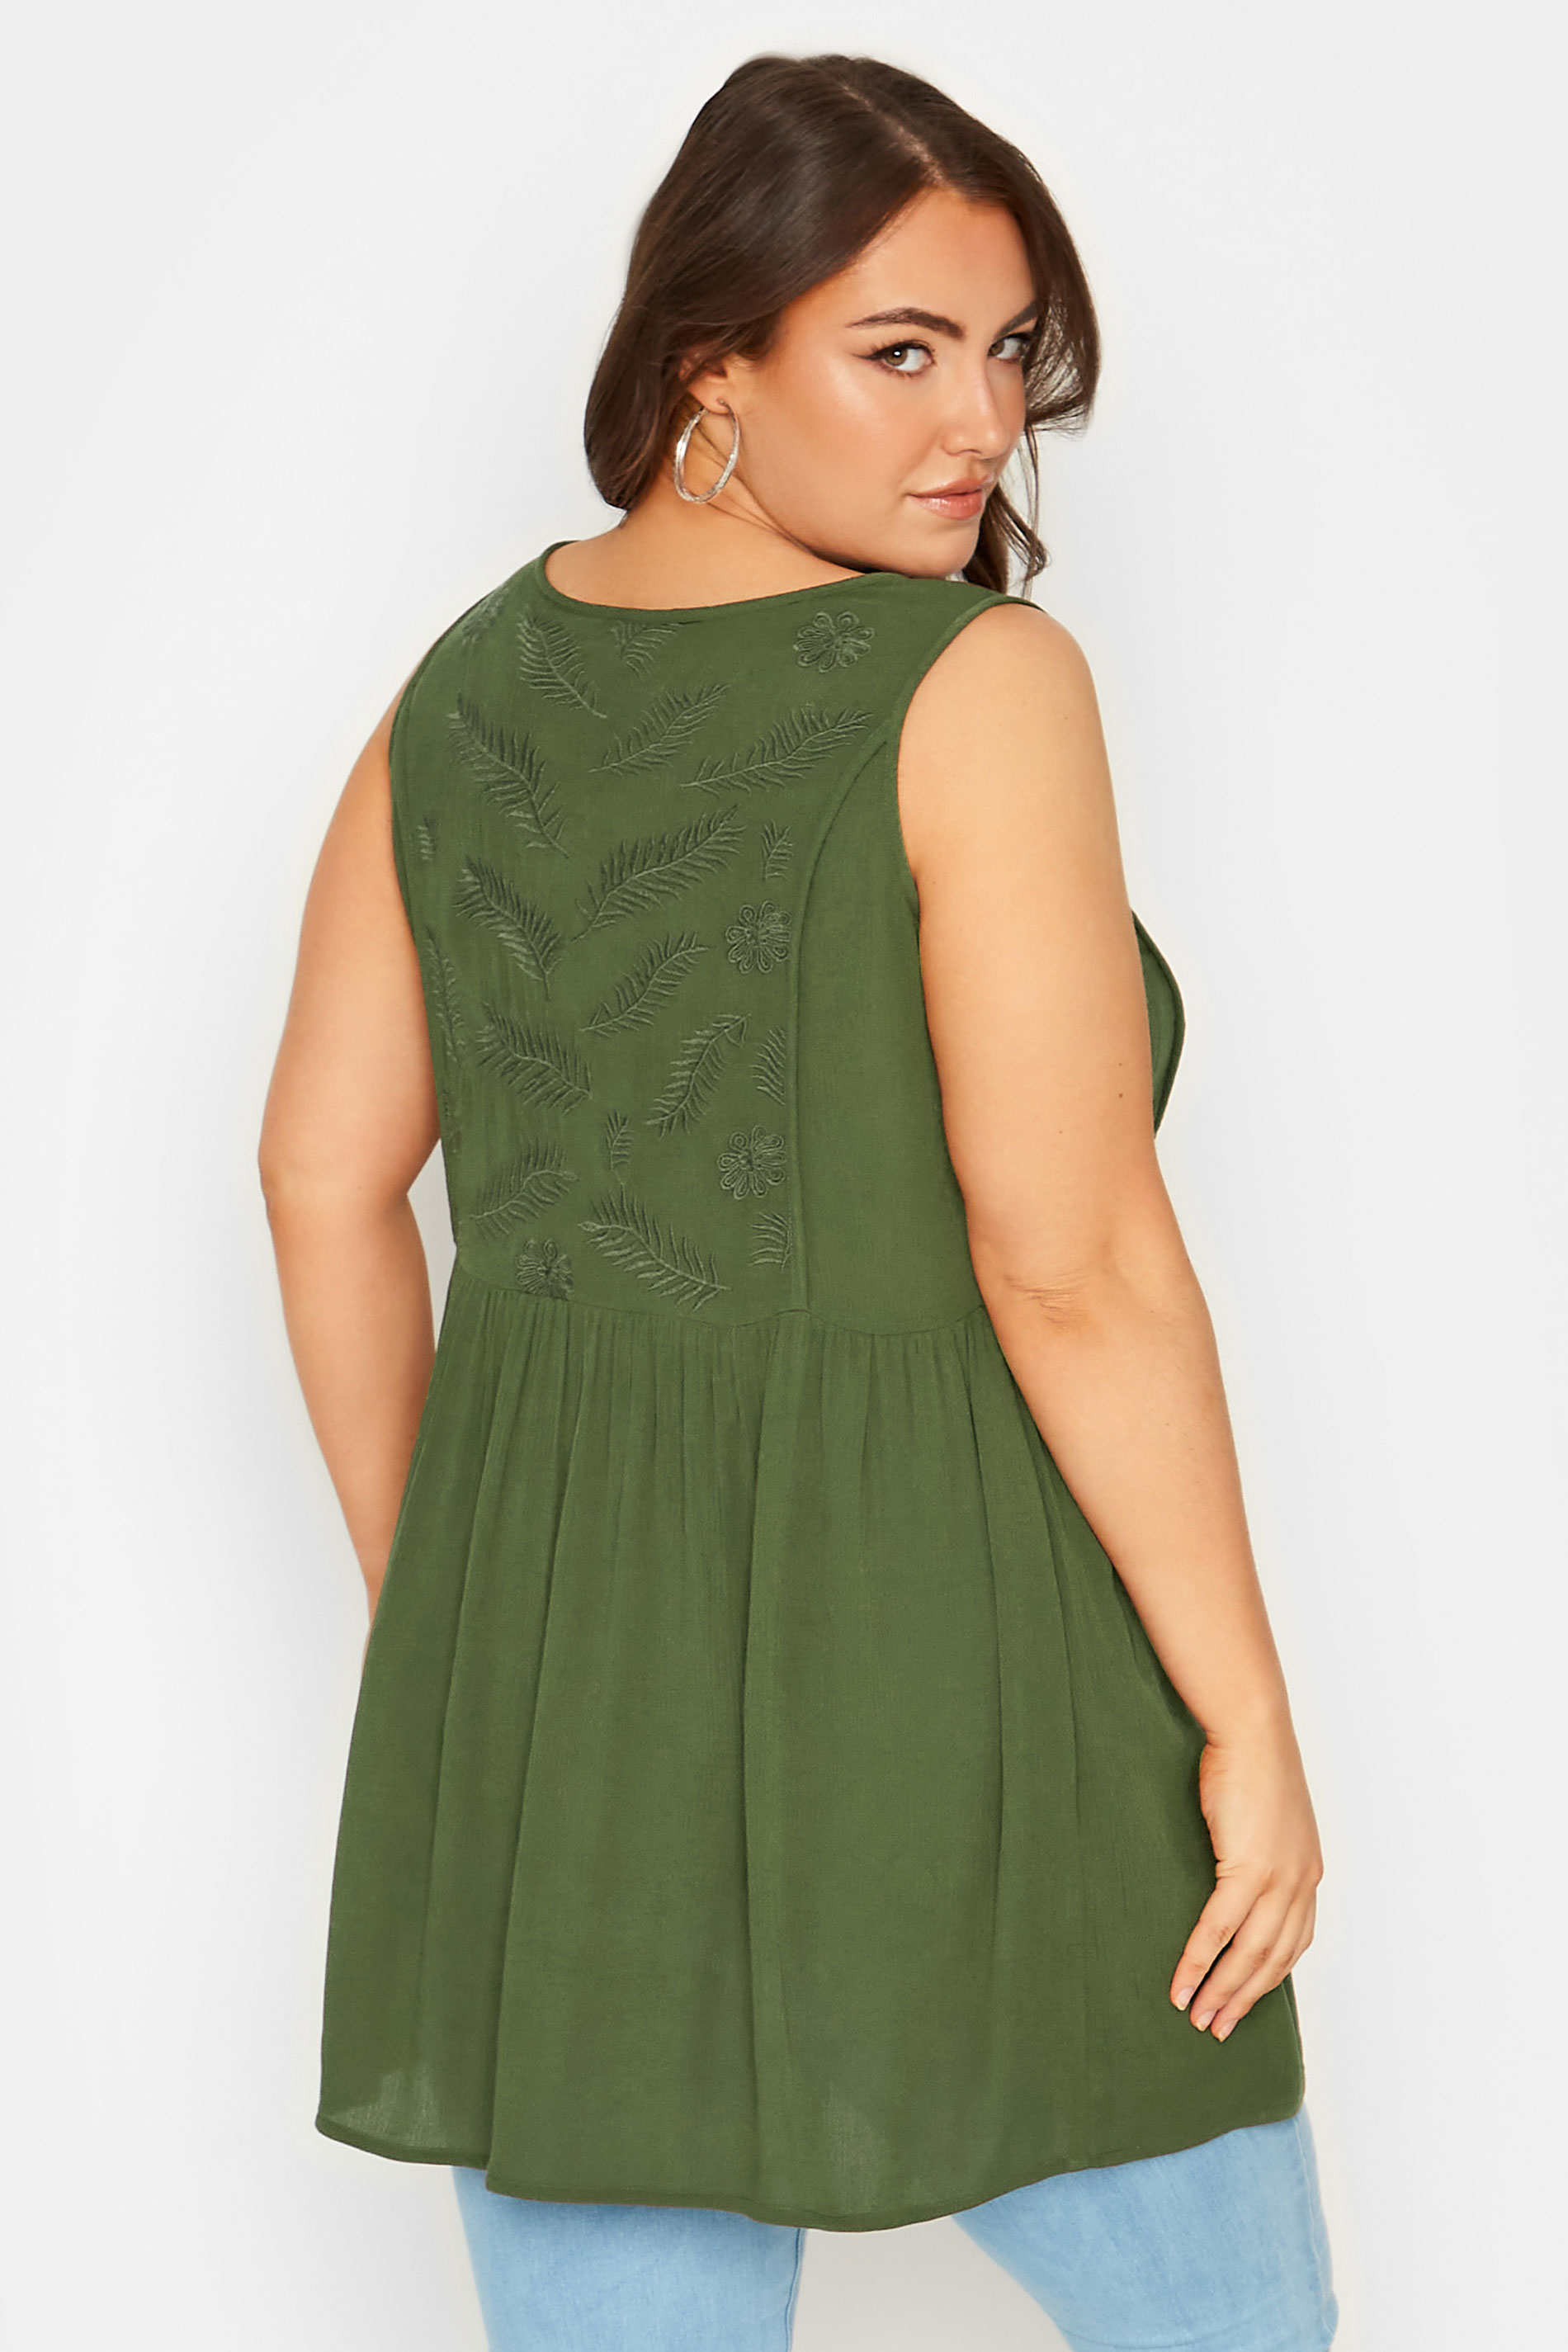 YOURS Plus Size Khaki Green Embroidered Peplum Vest Top | Yours Clothing 3